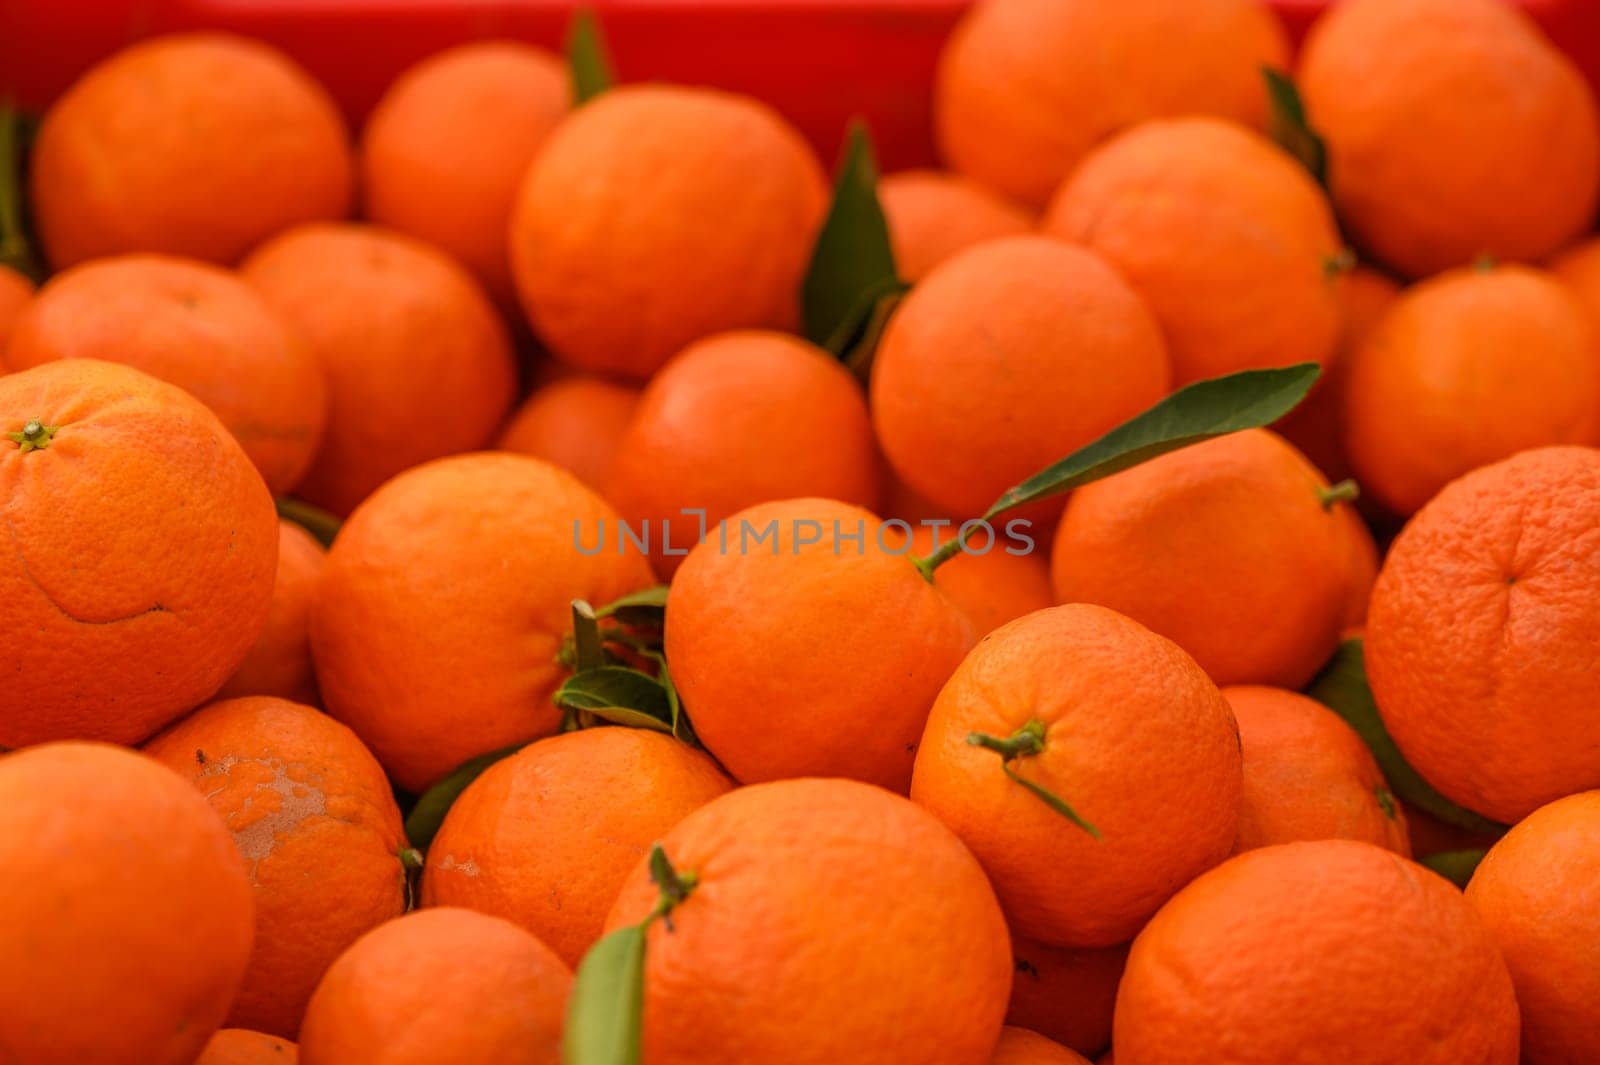 juicy fresh tangerines in boxes for sale in Cyprus in winter 4 by Mixa74